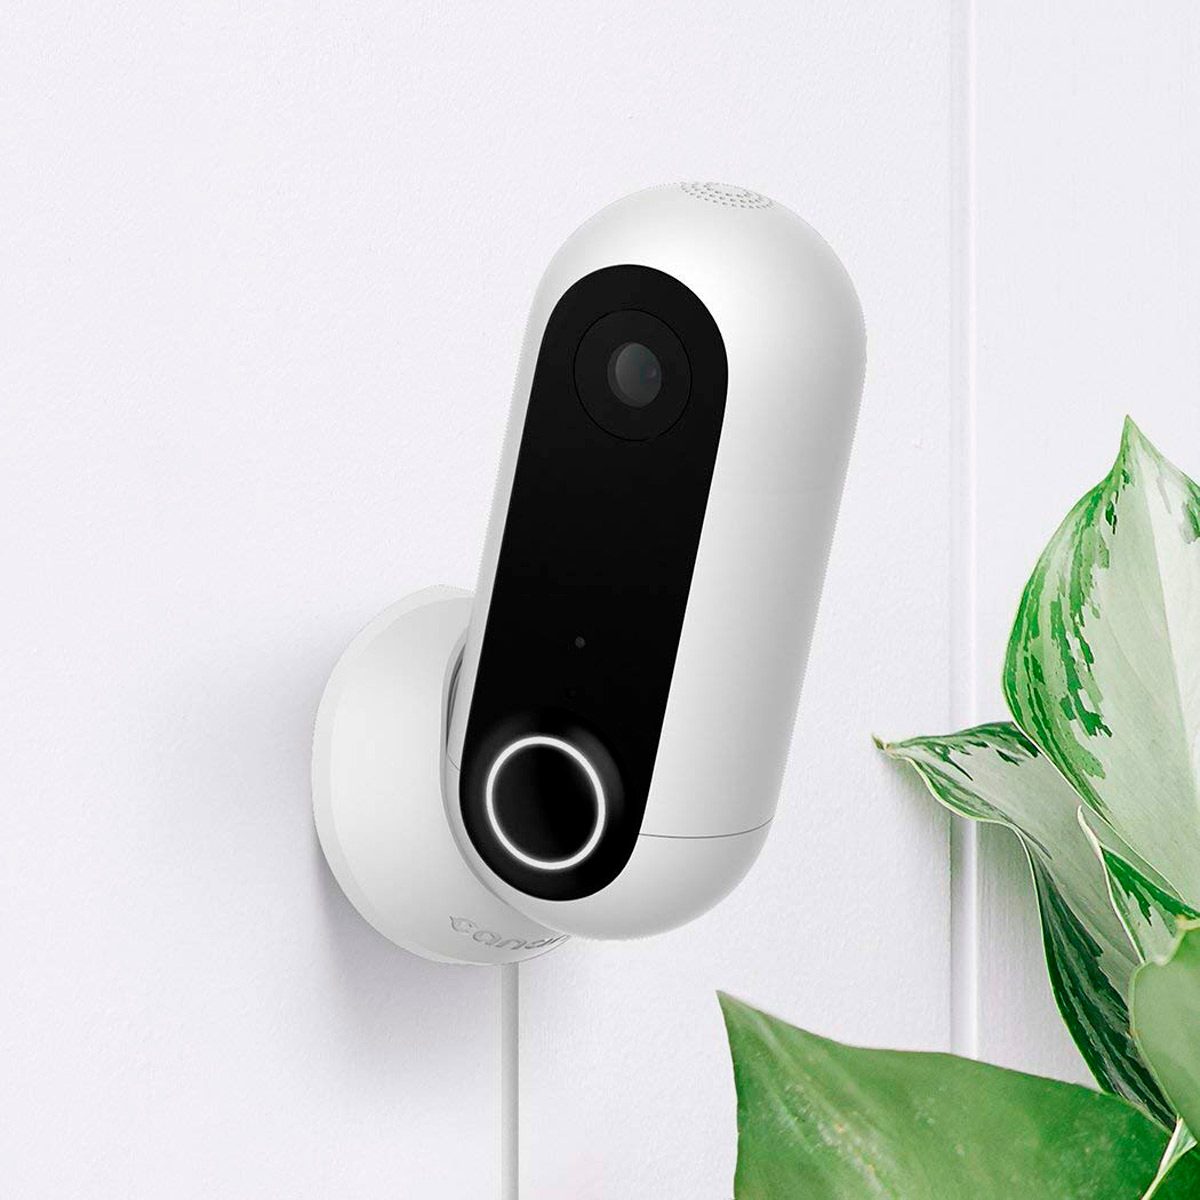 The 7 Best Home Security Devices You Can Install Yourself